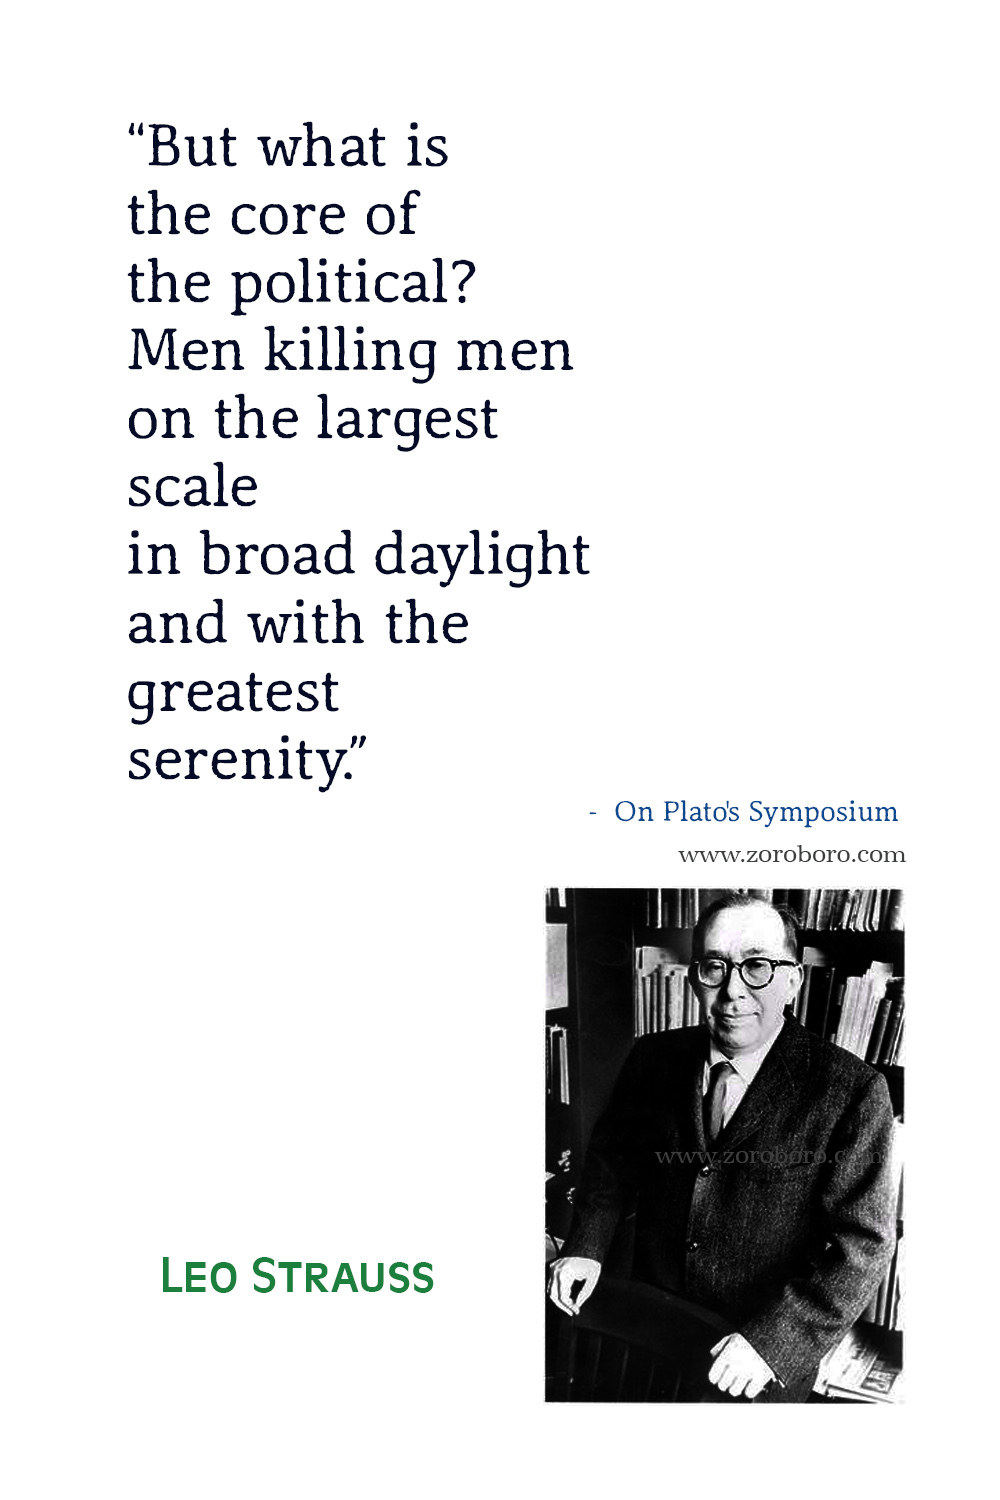 Leo Strauss Quotes, Leo Strauss, History of Political Philosophy, Leo Strauss Natural Right and History, Leo Strauss Books Quotes, Leo Strauss On Plato's Symposium .